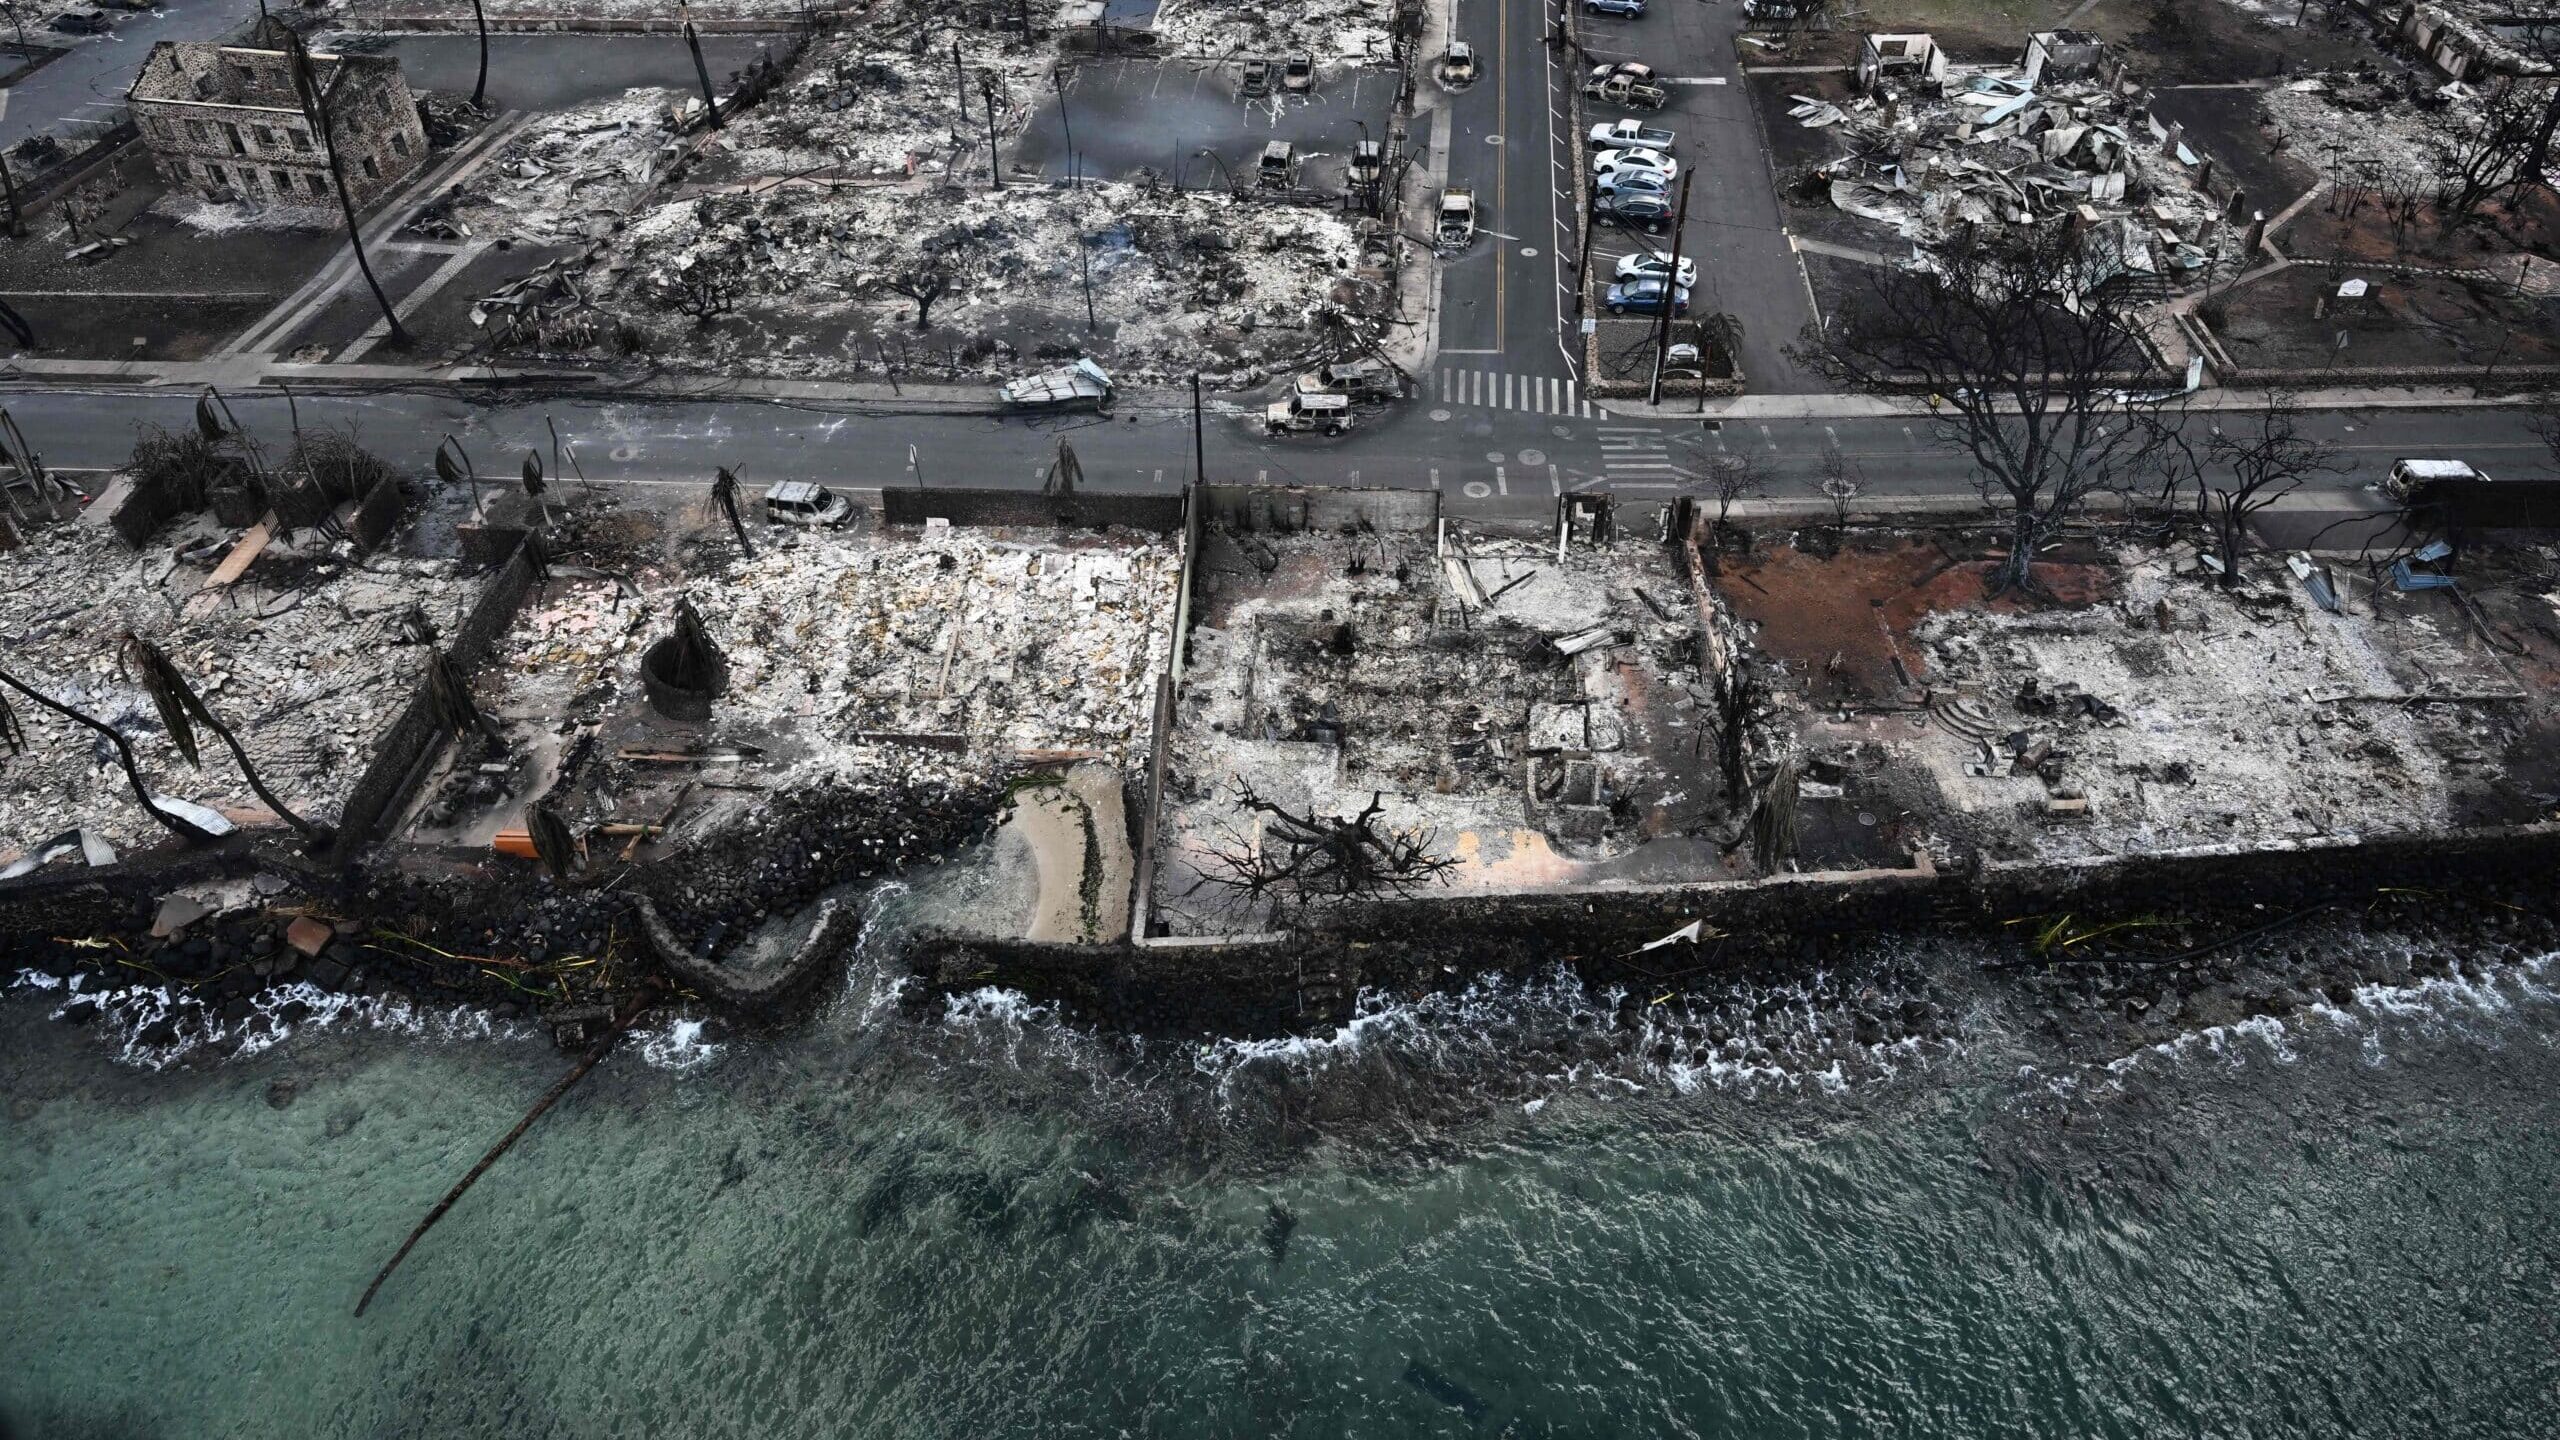 An aerial image taken on August 10, 2023 shows destroyed homes and buildings burned to the ground in Lahaina along the Pacific Ocean in the aftermath of wildfires in western Maui, Hawaii. A terrifying wildfire that left a historic Hawaiian town in charred ruins has killed at least 55 people, authorities said on August 10, making it one of the deadliest disasters in the US state's history. (Photo by Patrick T. Fallon / AFP)